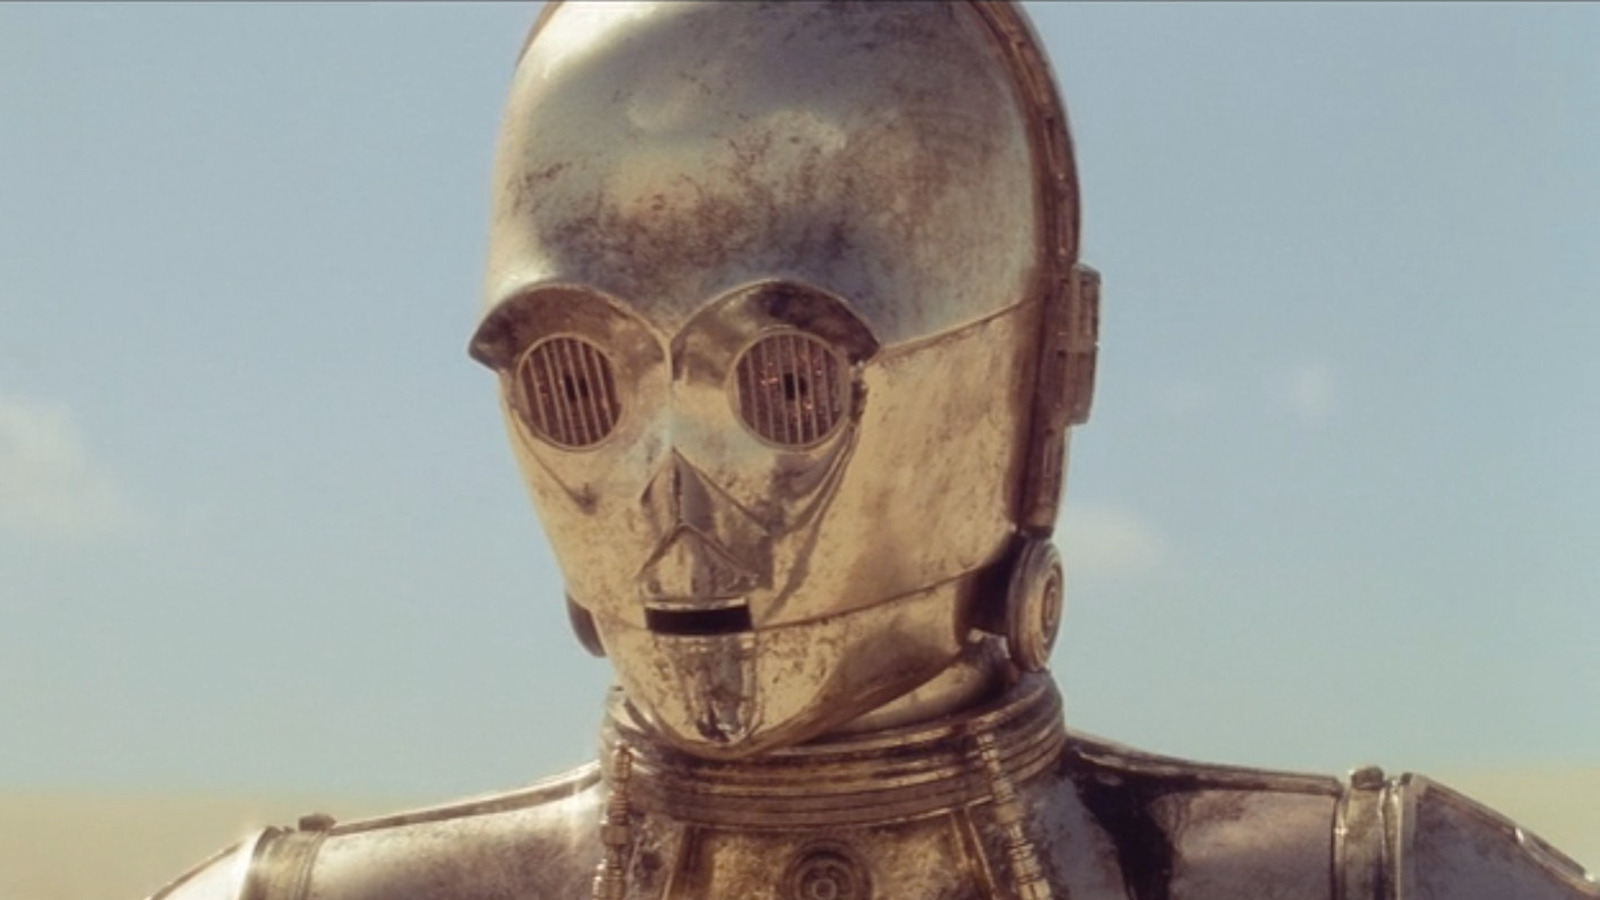 Star Wars' Anthony Daniels Was 'Insulted' By The Offer To Audition For C-3PO